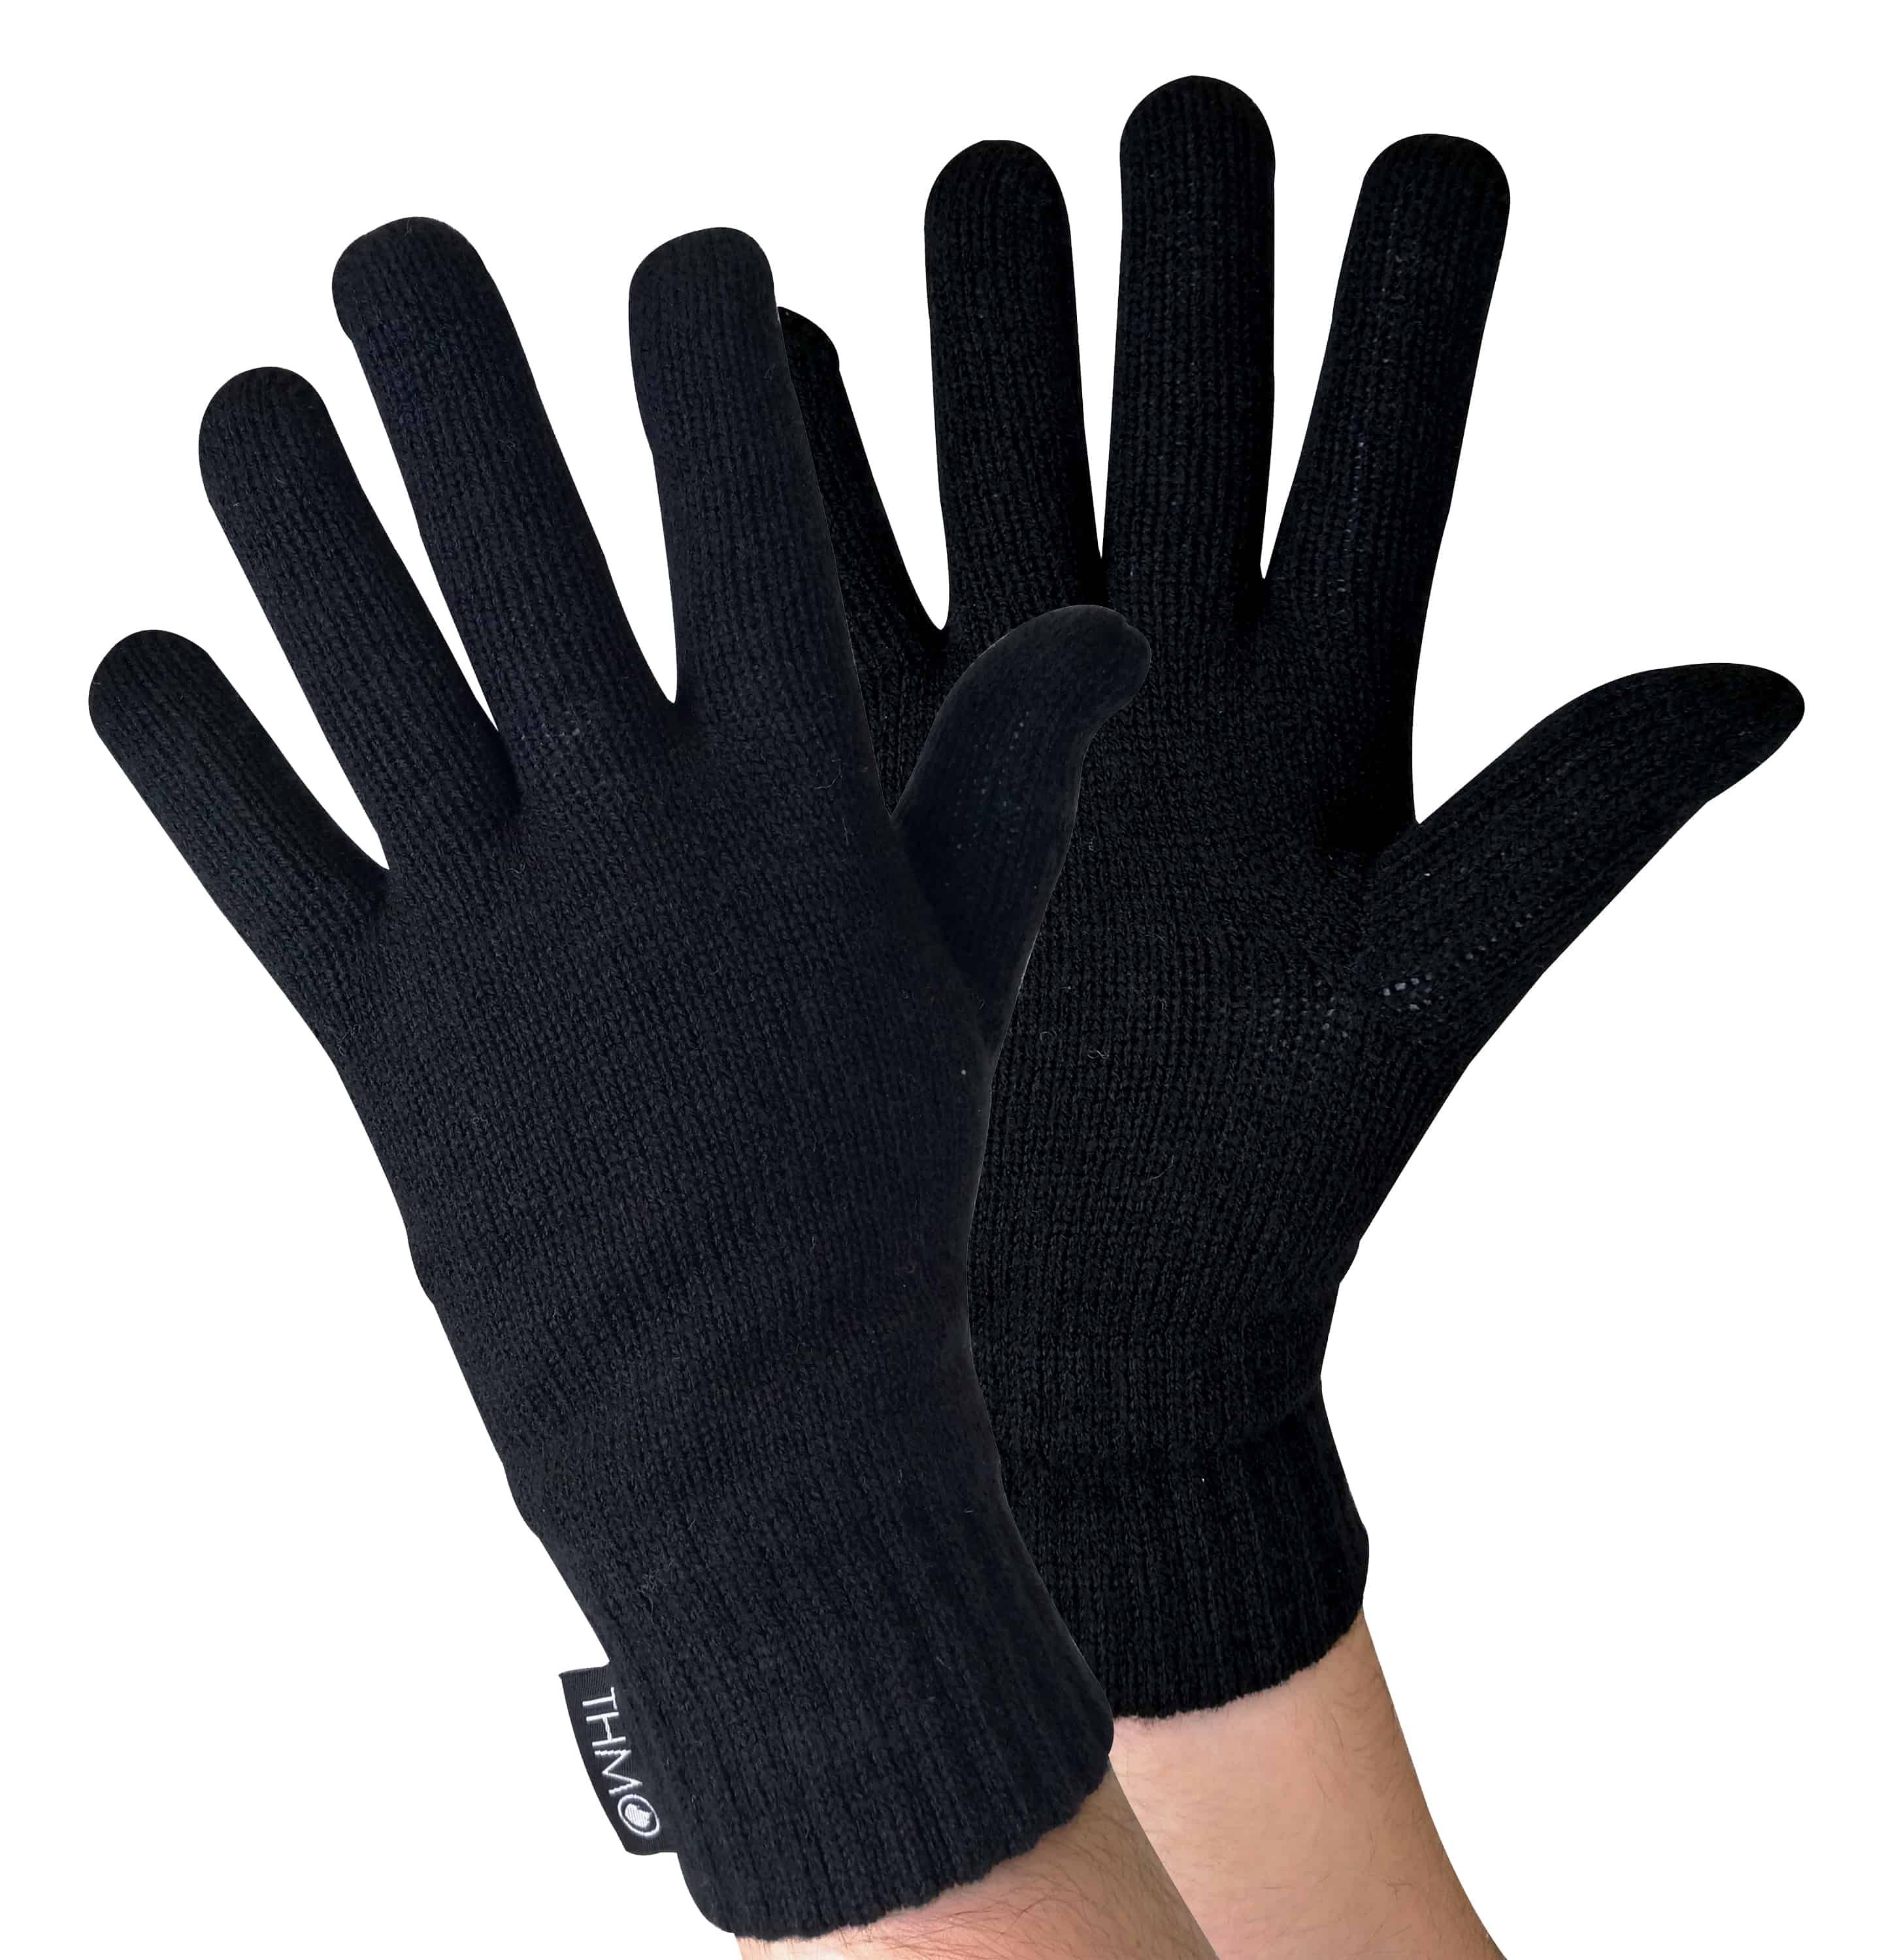 Mens THMO Full Finger Gloves  When blisteringly cold temperatures hit it is usually the end of your limbs that are hit the hardest. This obviously includes your hands. If you are looking for Gloves with expert knitting and effective lining then these mens THMO full finger Gloves with thinsulate lining are the items you need to keep your hands warm and protected.  These Gloves have two layers built into them to facilitate the process of keeping your hands warm. The outer layer is knitted made with 100% acrylic and is there to protect your hands from cold elements. The inner lining is made with 3M Thinsulate lining. Thinsulate is well known for keeping your hands warm and is considered one of the most effective linings. The purpose of the lining is to hold warm air inside the Gloves and to keep the hot air close to your skin. The ribbed cuff on the Gloves is tight enough to stop the warm air escaping but not too tight to be uncomfortable.  The THMO logo badge also hangs from the cuff, separating your glove fashion from the rest. Remember... BE WARM, THINK THMO. These Gloves are available in 2 colours including black and grey and there are 2 sizes to choose between including M/L & L/XL. They are made from 100% acrylic and are made with 2 layers. They are safely machine washable.  Extra Product Details  - THMO - Mens Full Finger Gloves - 100% Acrylic  - 3M Thinsulate Lining - Expert Insulation - Secure Cuff - 2 Sizes M/L & L/XL - 2 Colours Black & Grey - Machine Washable